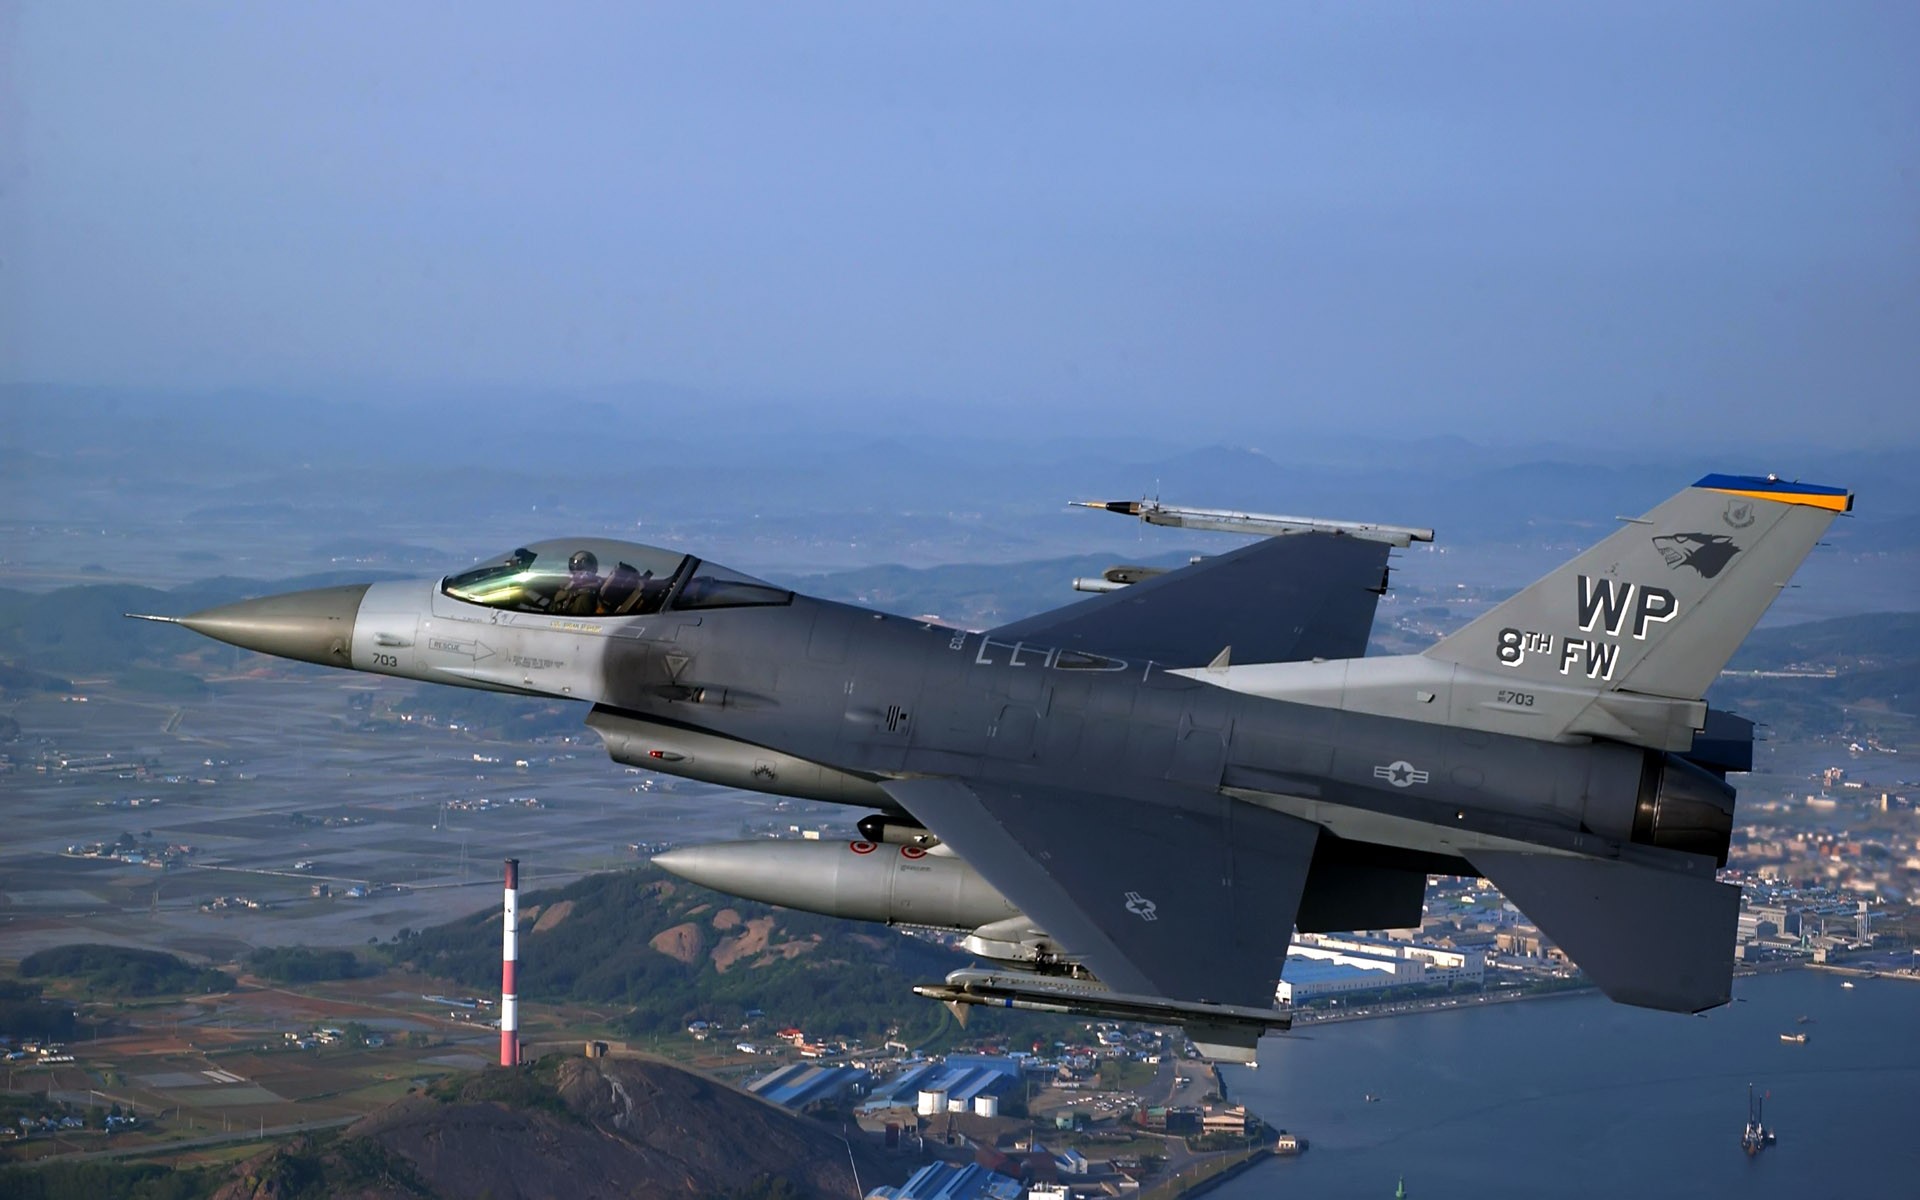 General 1920x1200 airplane General Dynamics F-16 Fighting Falcon military aircraft aircraft military vehicle vehicle military jet fighter US Air Force General Dynamics American aircraft